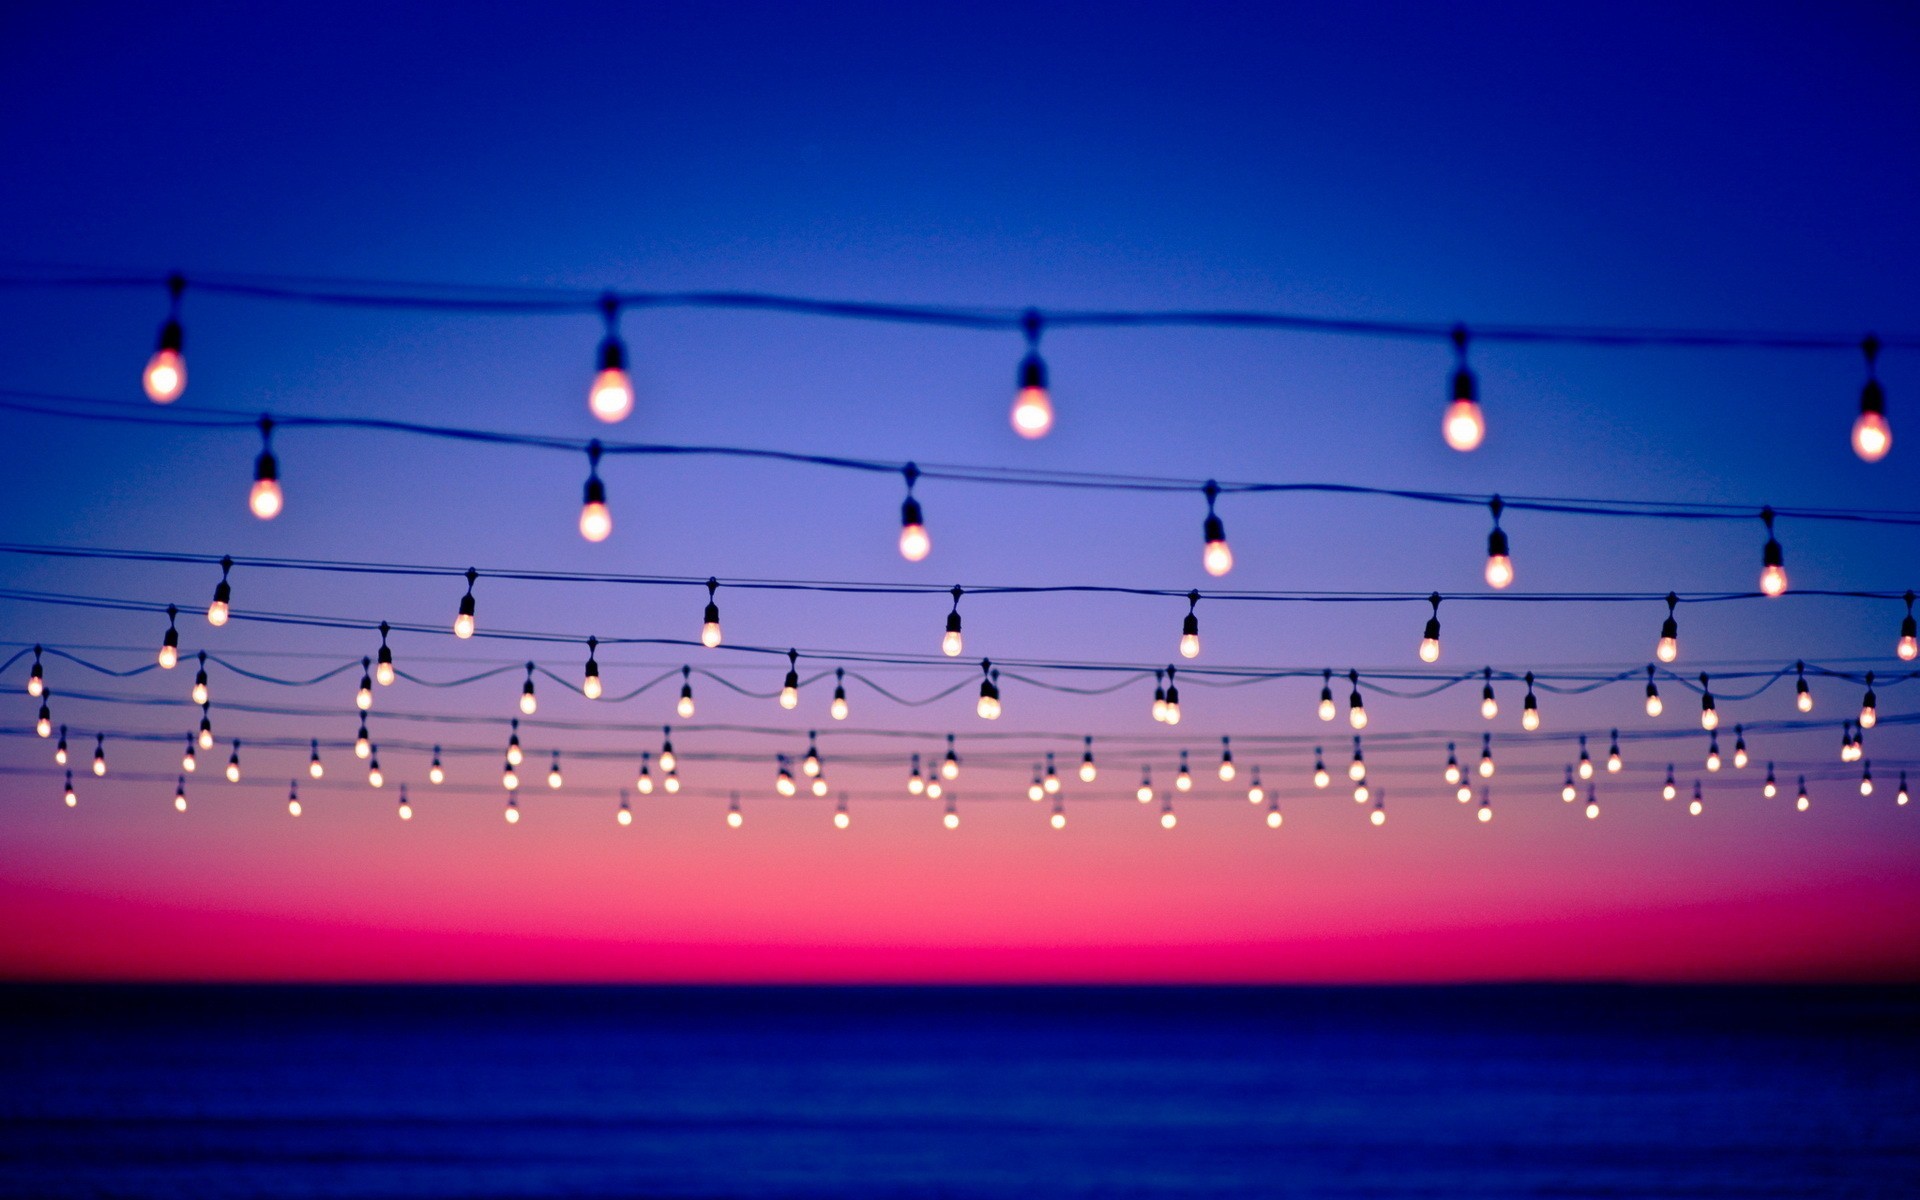 1920x1200 Light Bulbs Wires Sky Photo Wallpaper | FreeHDWall.Com | Free HD Wallpapers  for your Desktop